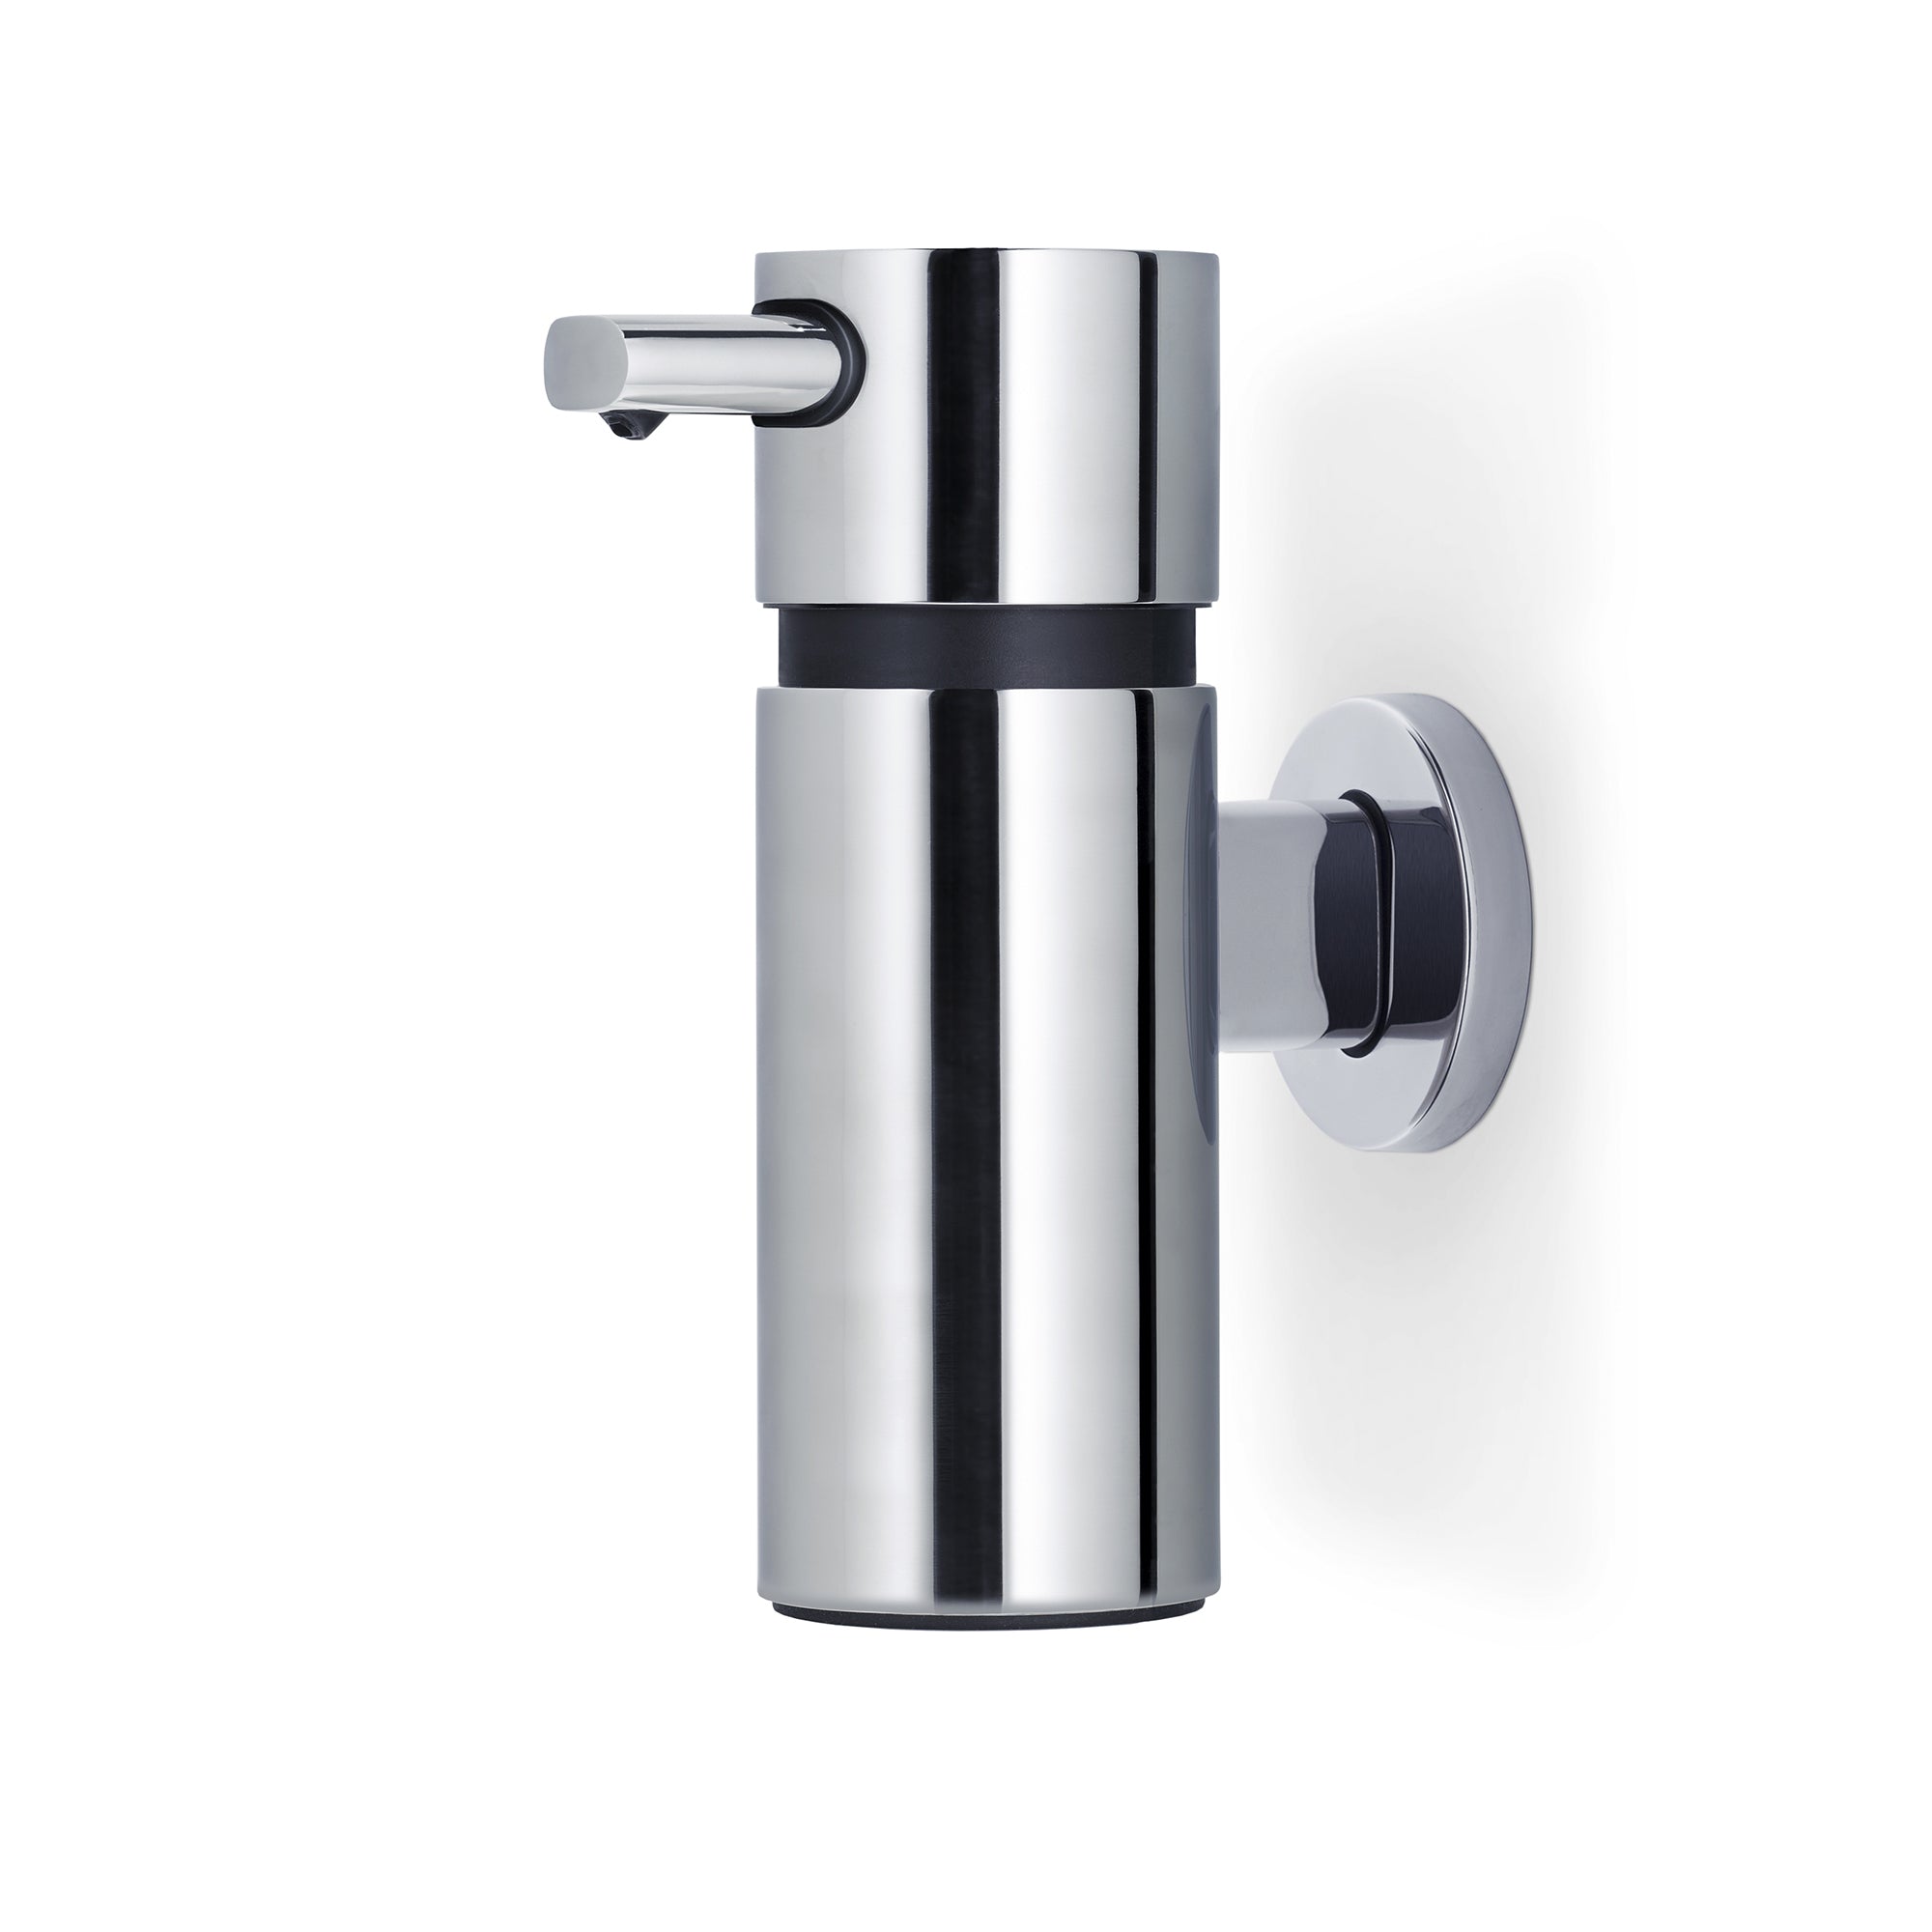 *AREO Wall-mounted Soap Dispenser polished 220 ml*